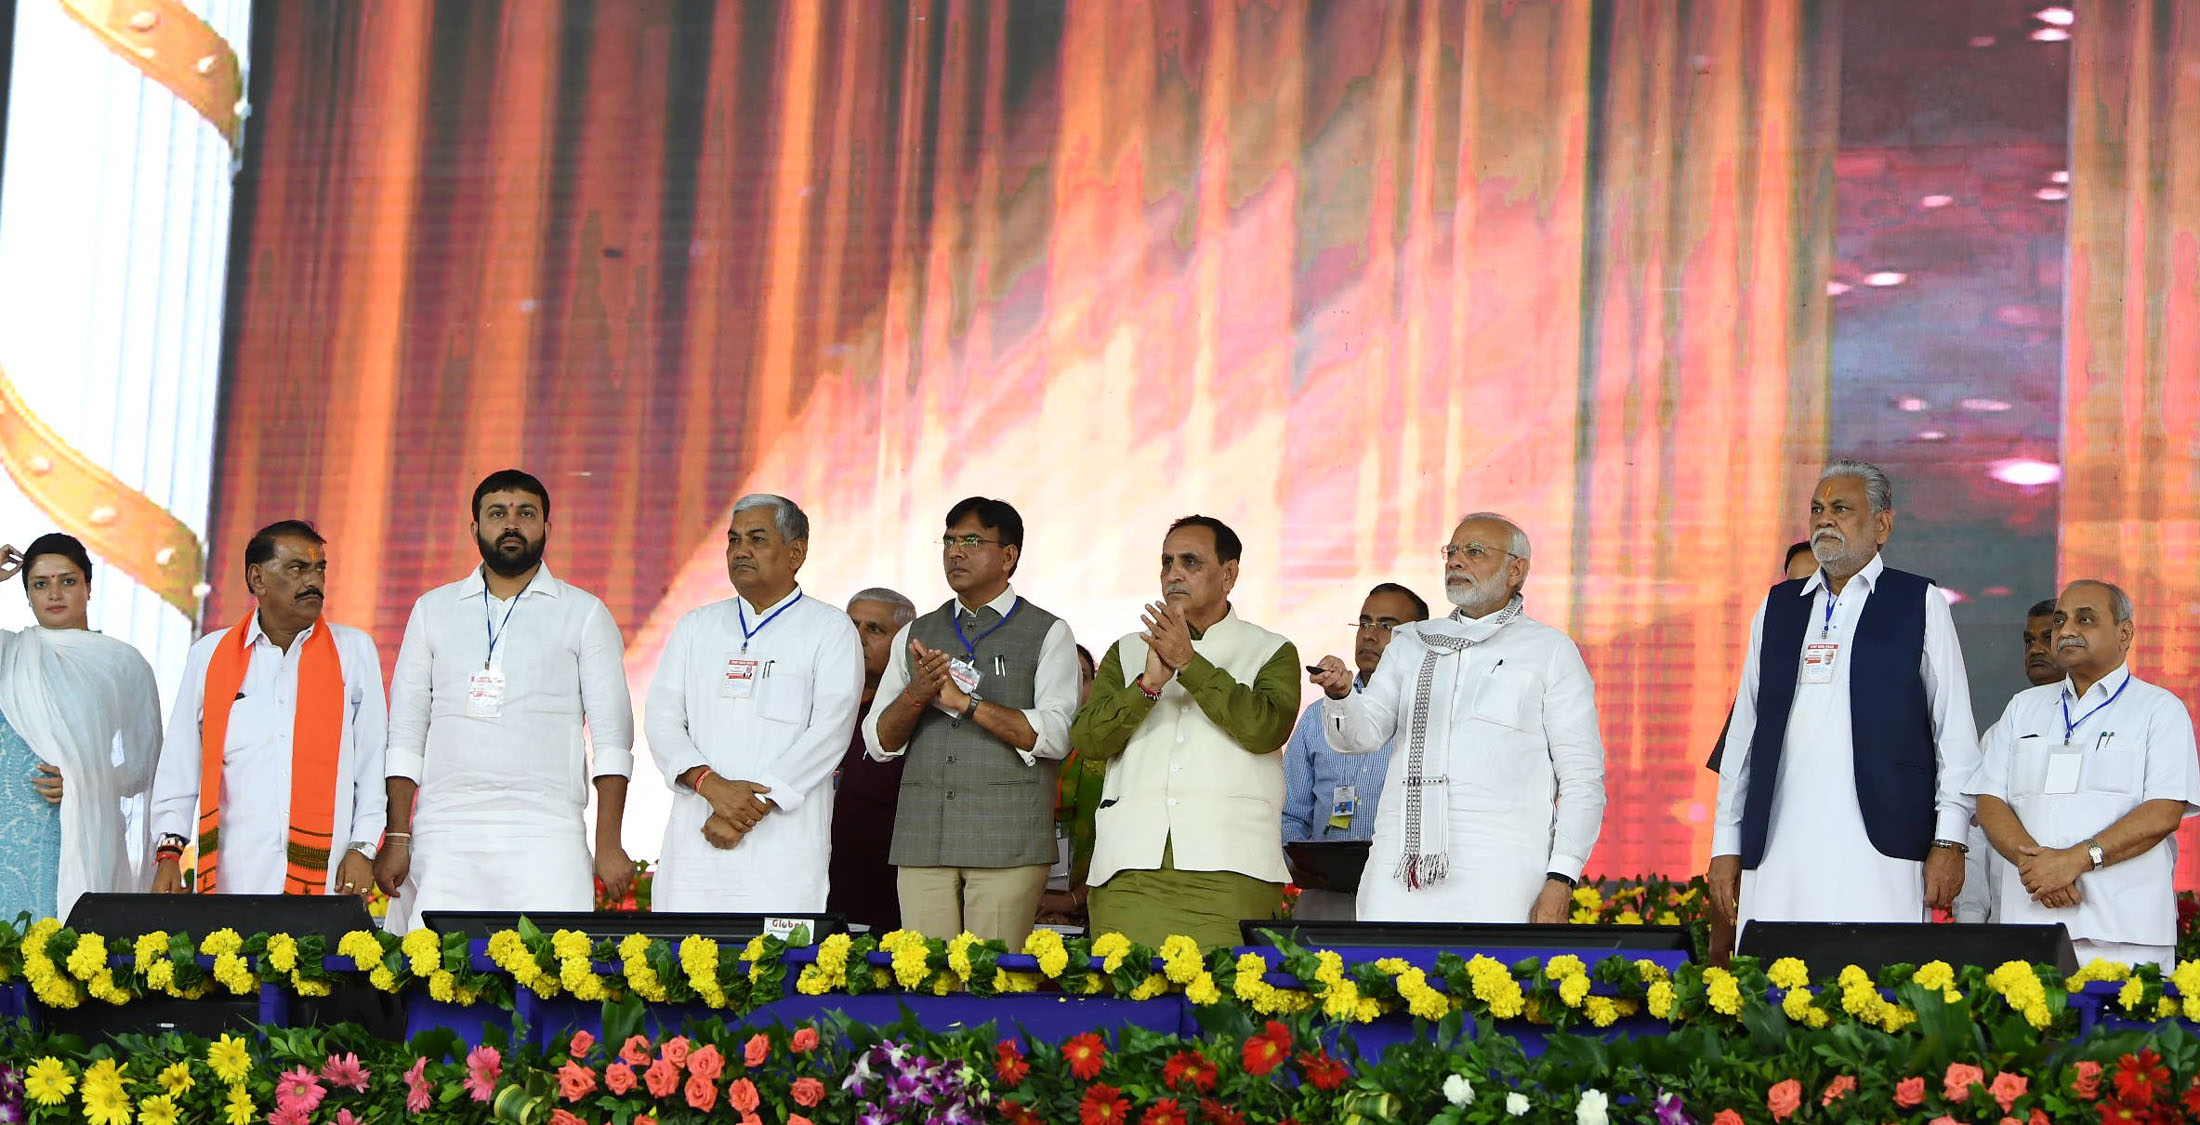 Our Aim-One medical college hospital in each district: PM Modi